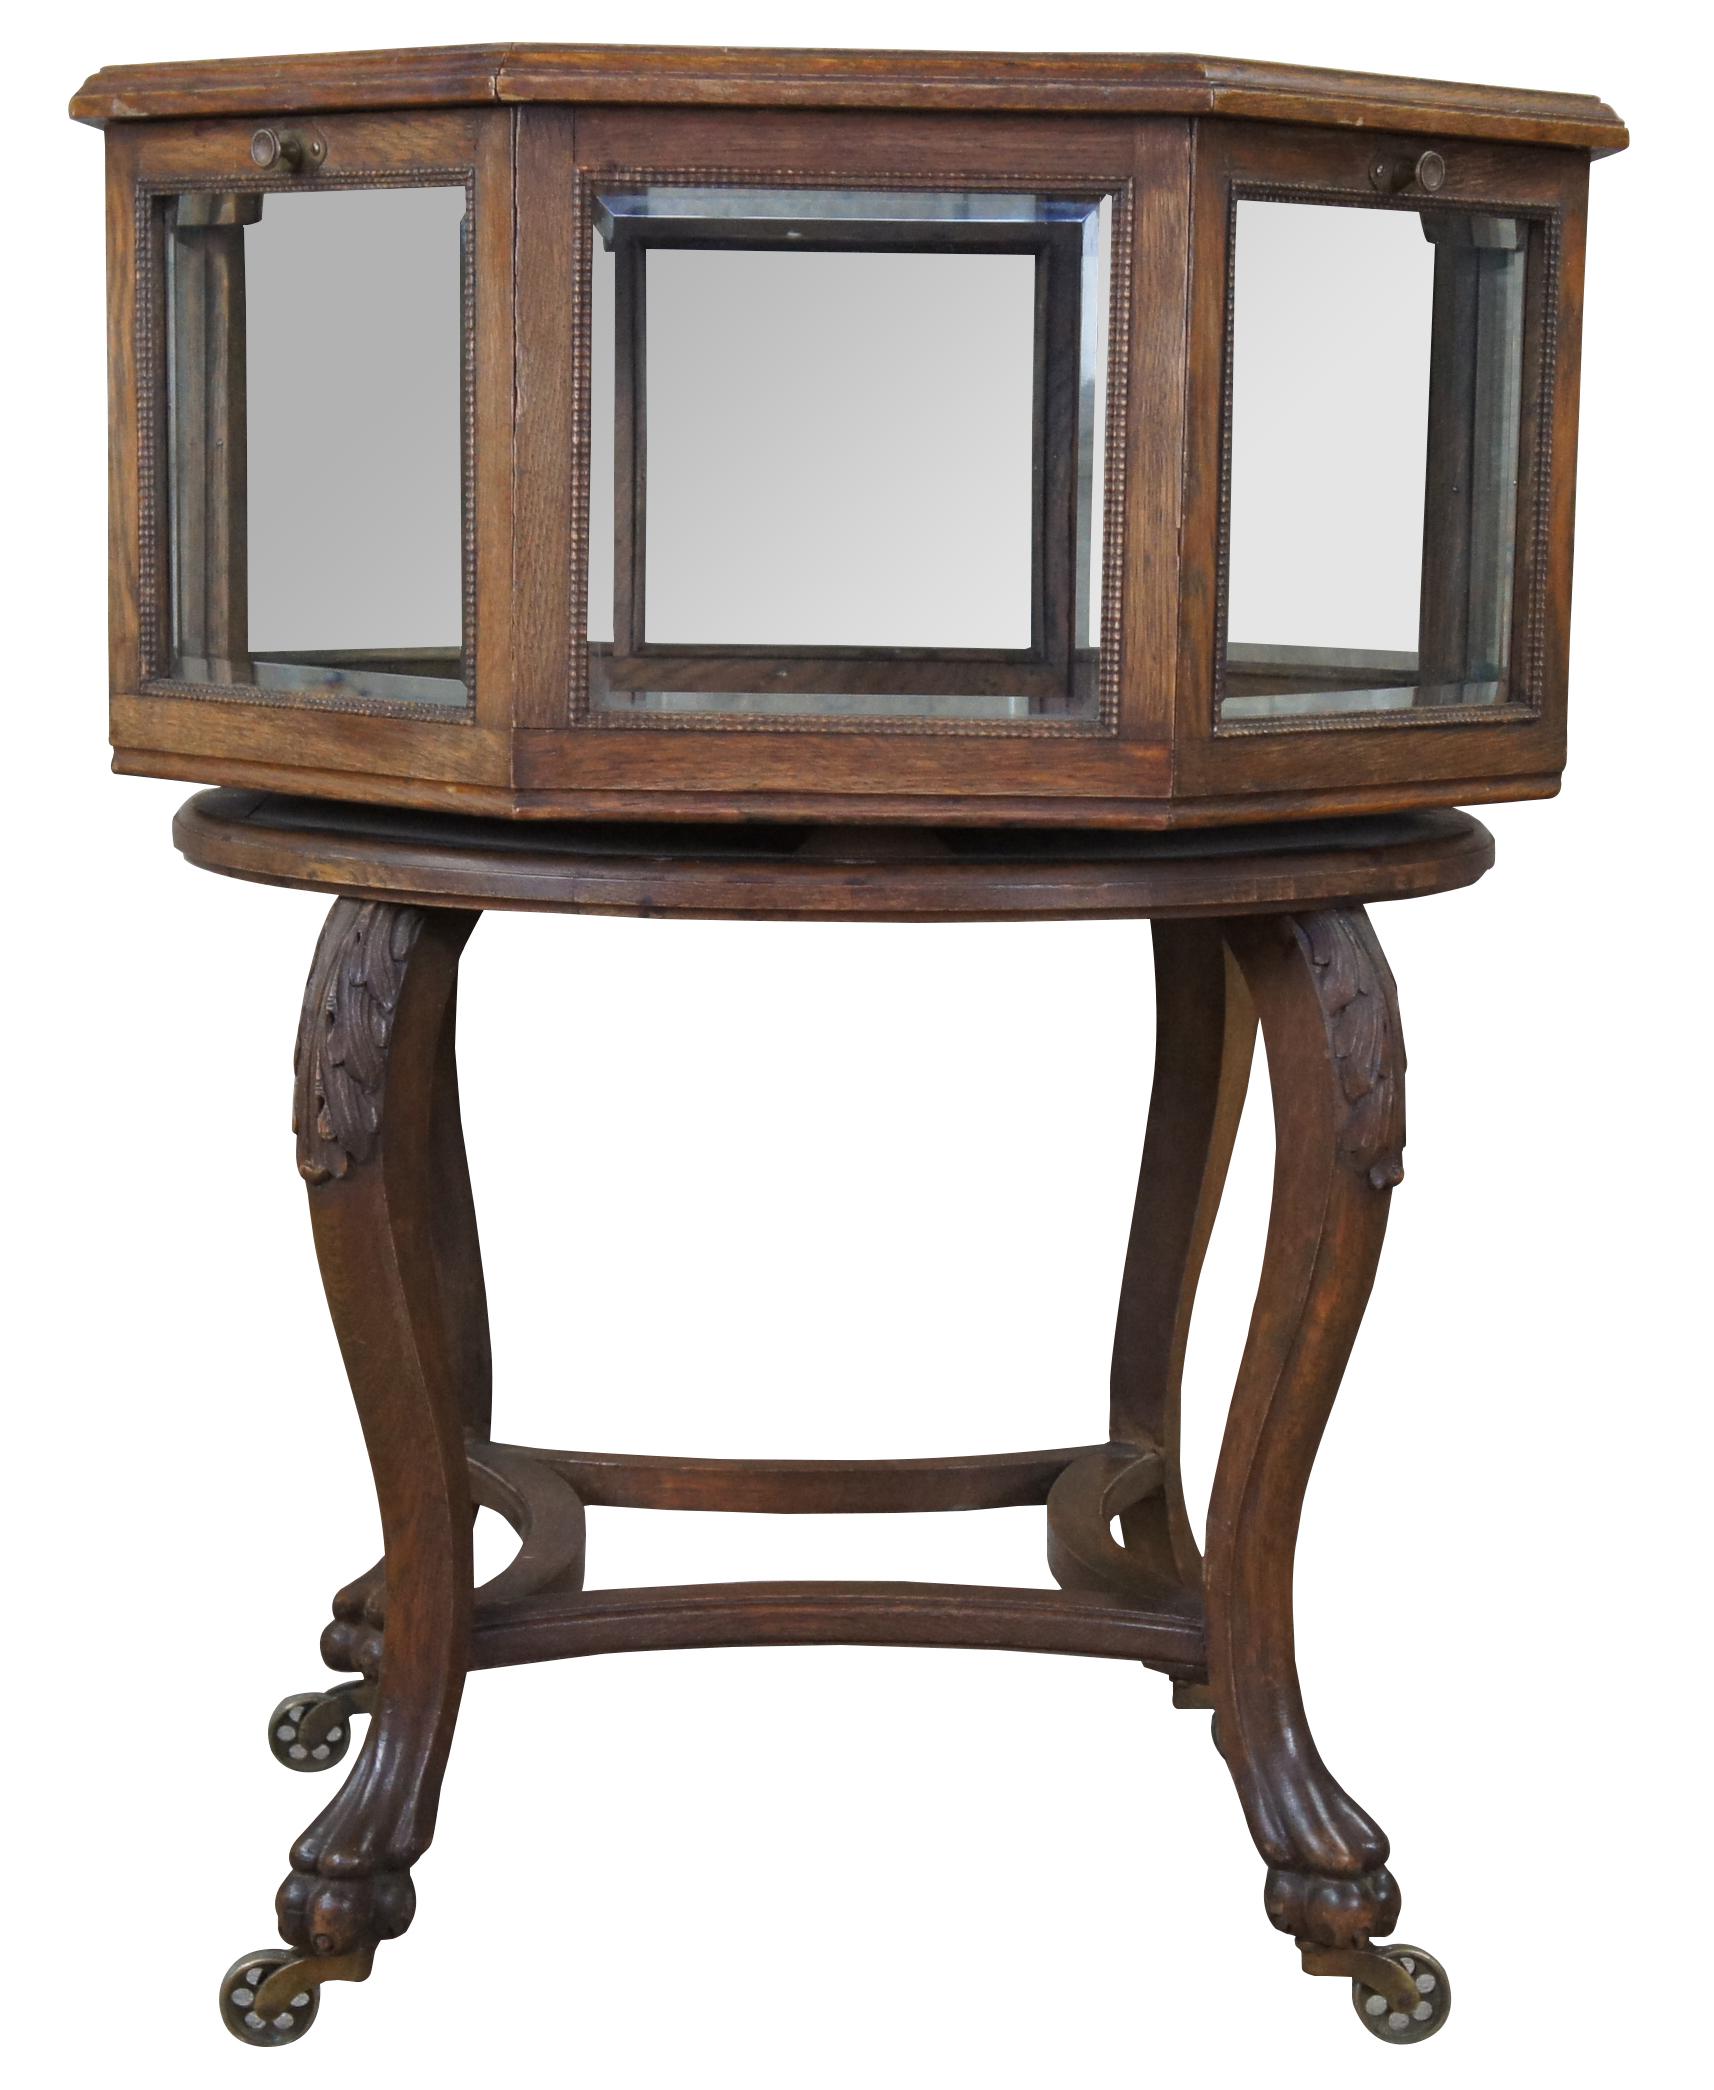 An exquisite and rare Victorian octagonal shaped Vitrine or Bijouterie,  Last quarter of the 19th century.  Made of quartersawn oak featuring rotating top with beveled glass, four drop front doors over serpentine legs with claw feet and